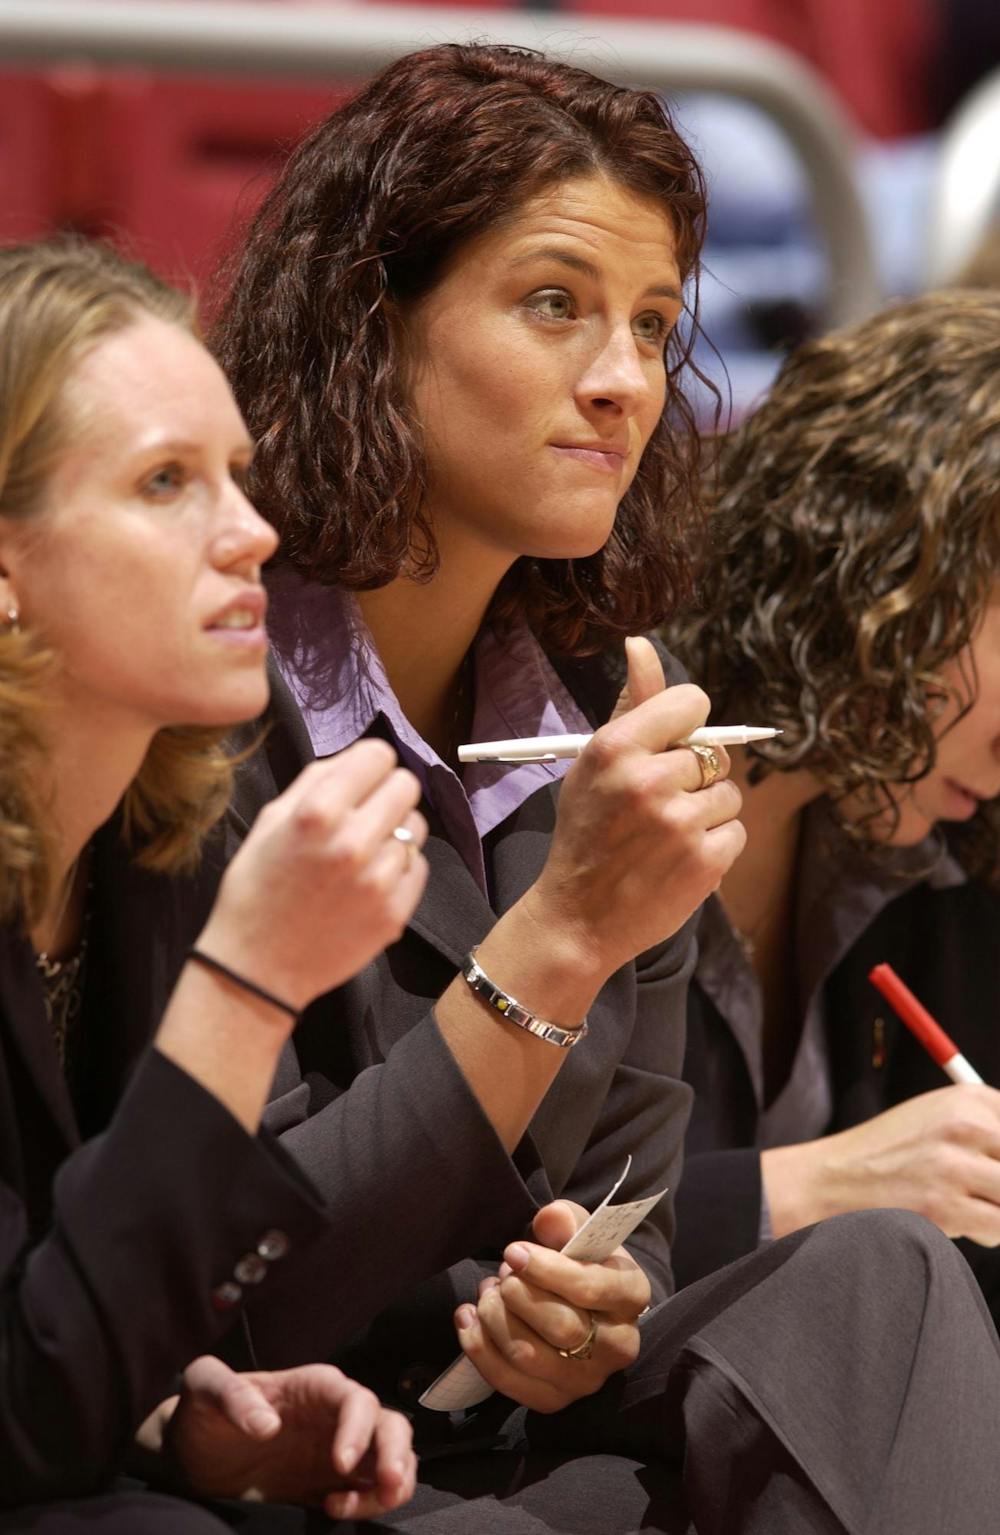 <p>Stephanie White watches the game against Illinois State Dec. 2, 2003 at Worthen Arena. White was an assistant coach for Ball State during the 2003-2004 season. Ball State Athletics, Photos Provided&nbsp;</p>